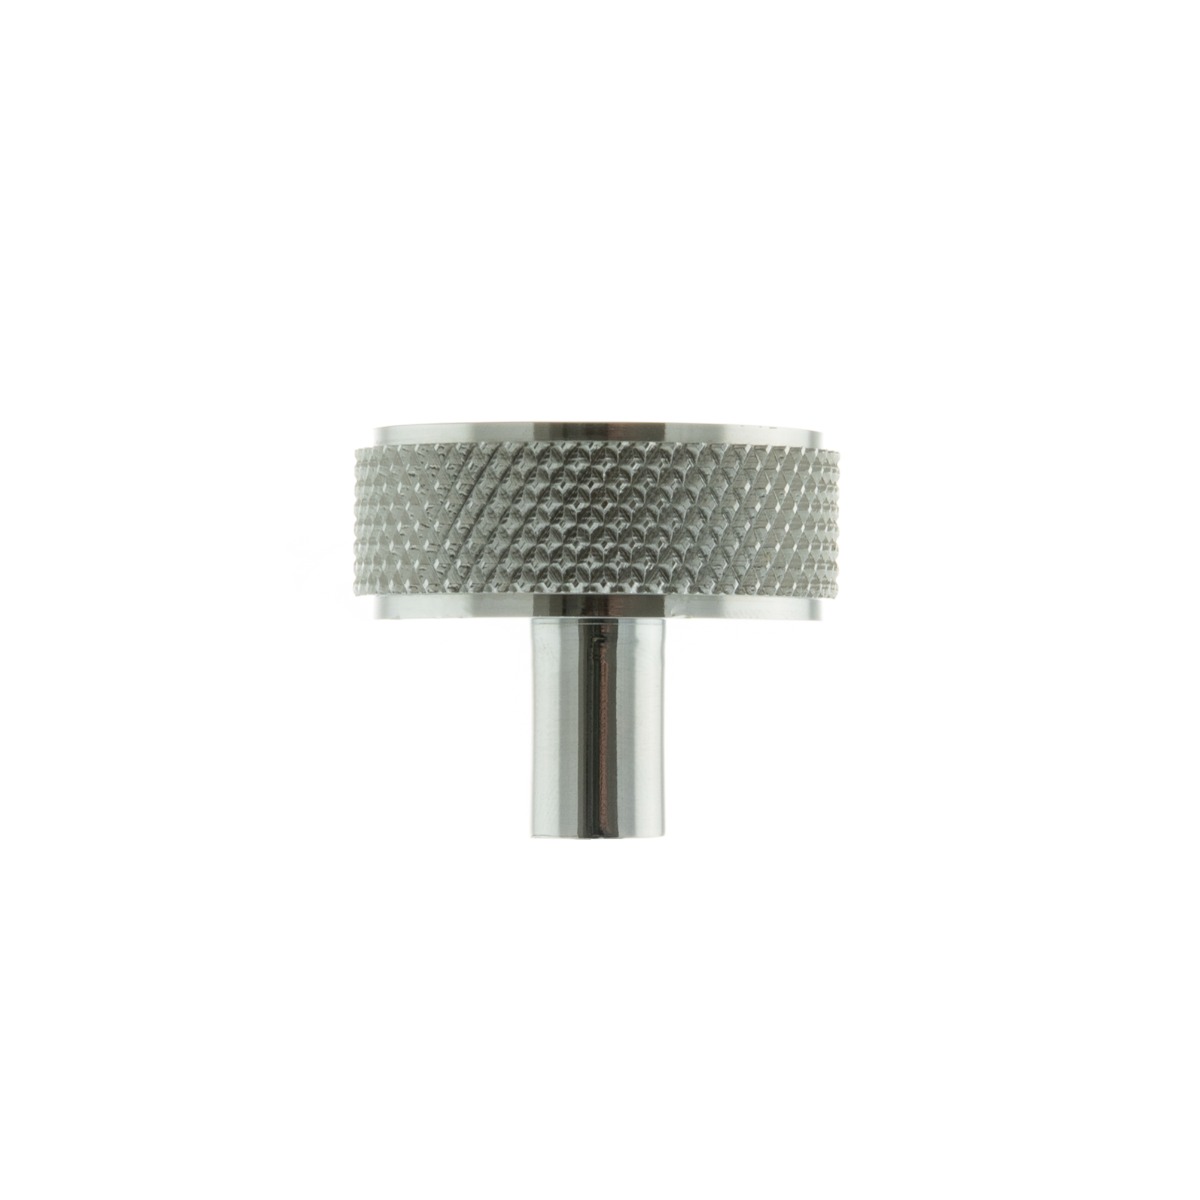 Millhouse Brass Hargreaves Disc Knurled Cabinet Knob on Concealed Fix - Polished Chrome MHCK1935PC